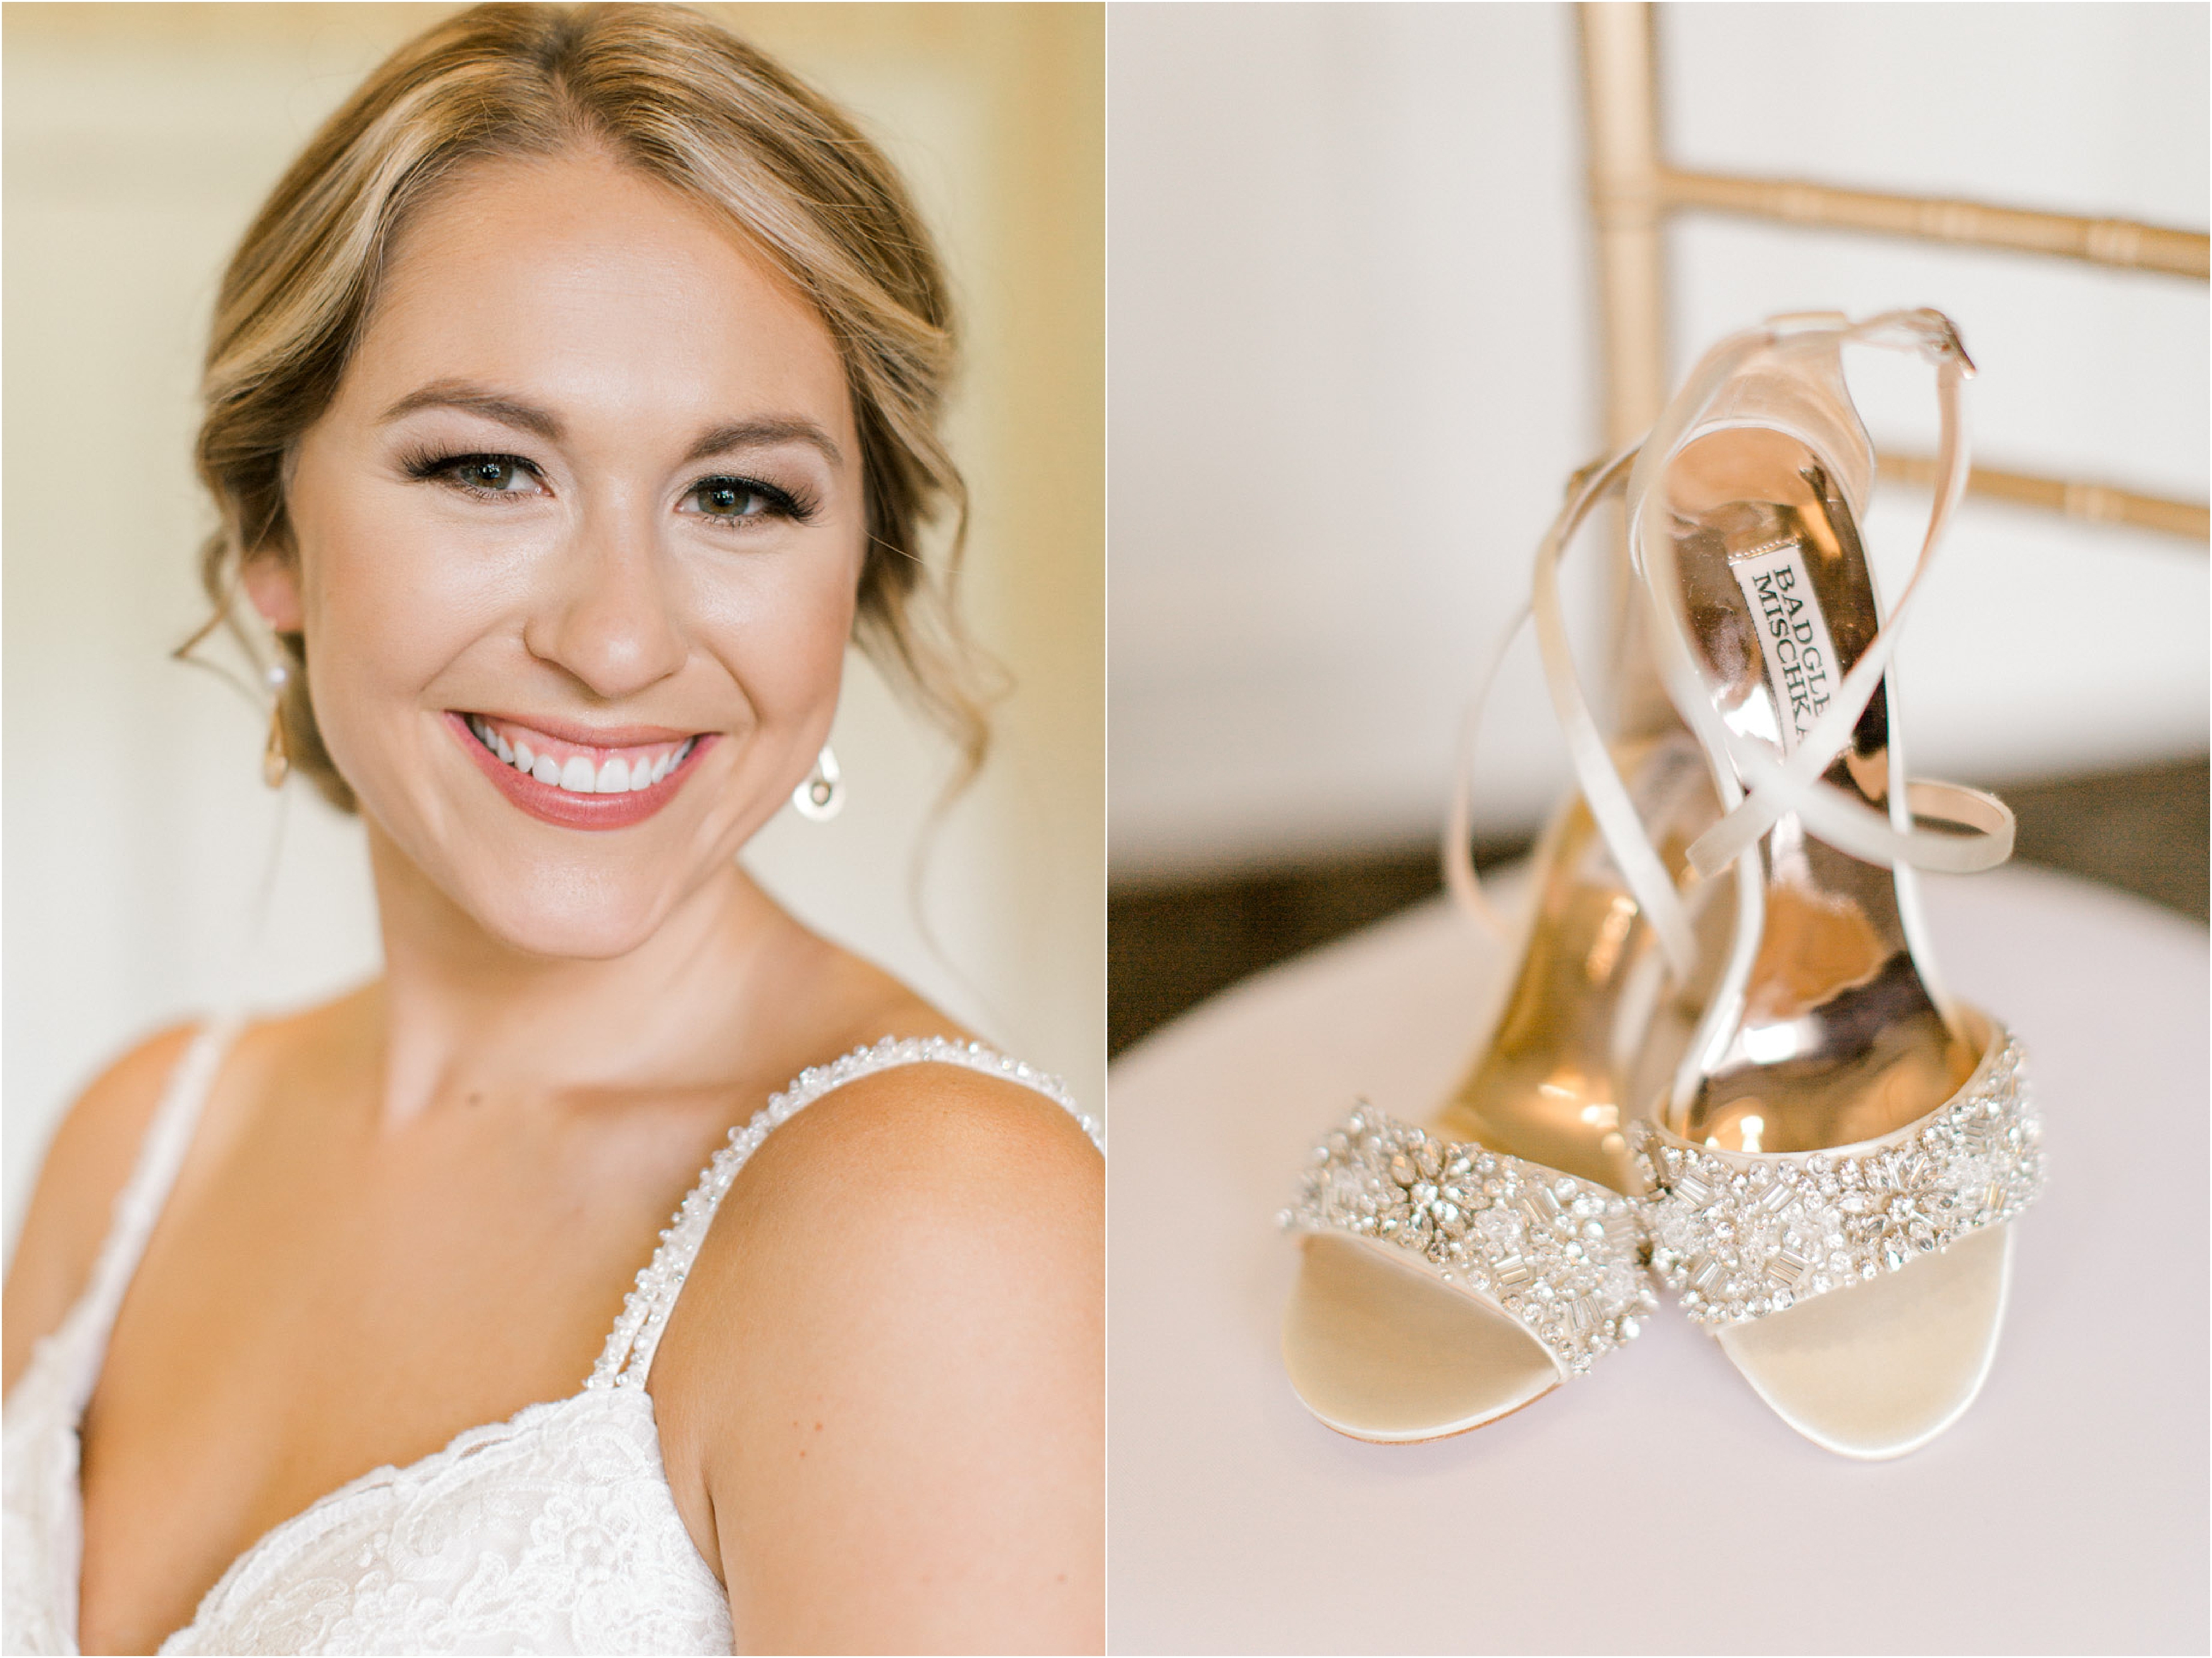 Bridal portraits and details in Morilee wedding gown